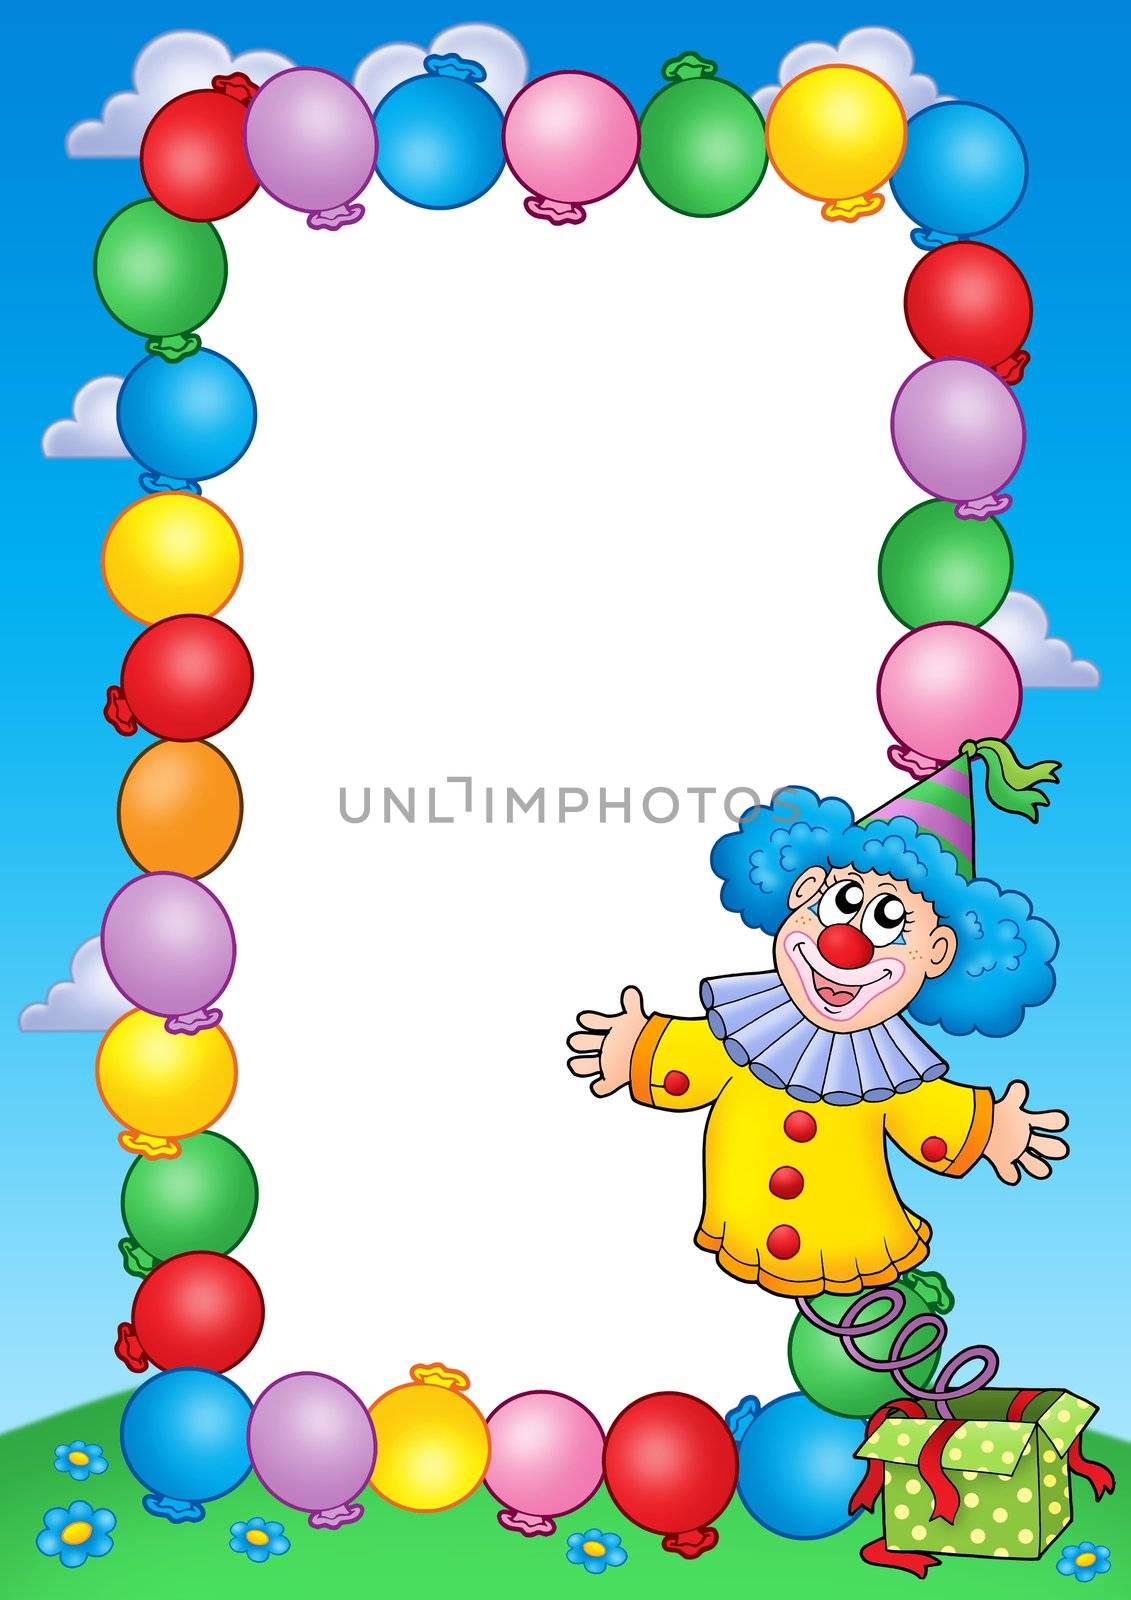 Party invitation frame with clown 3 - color illustration.